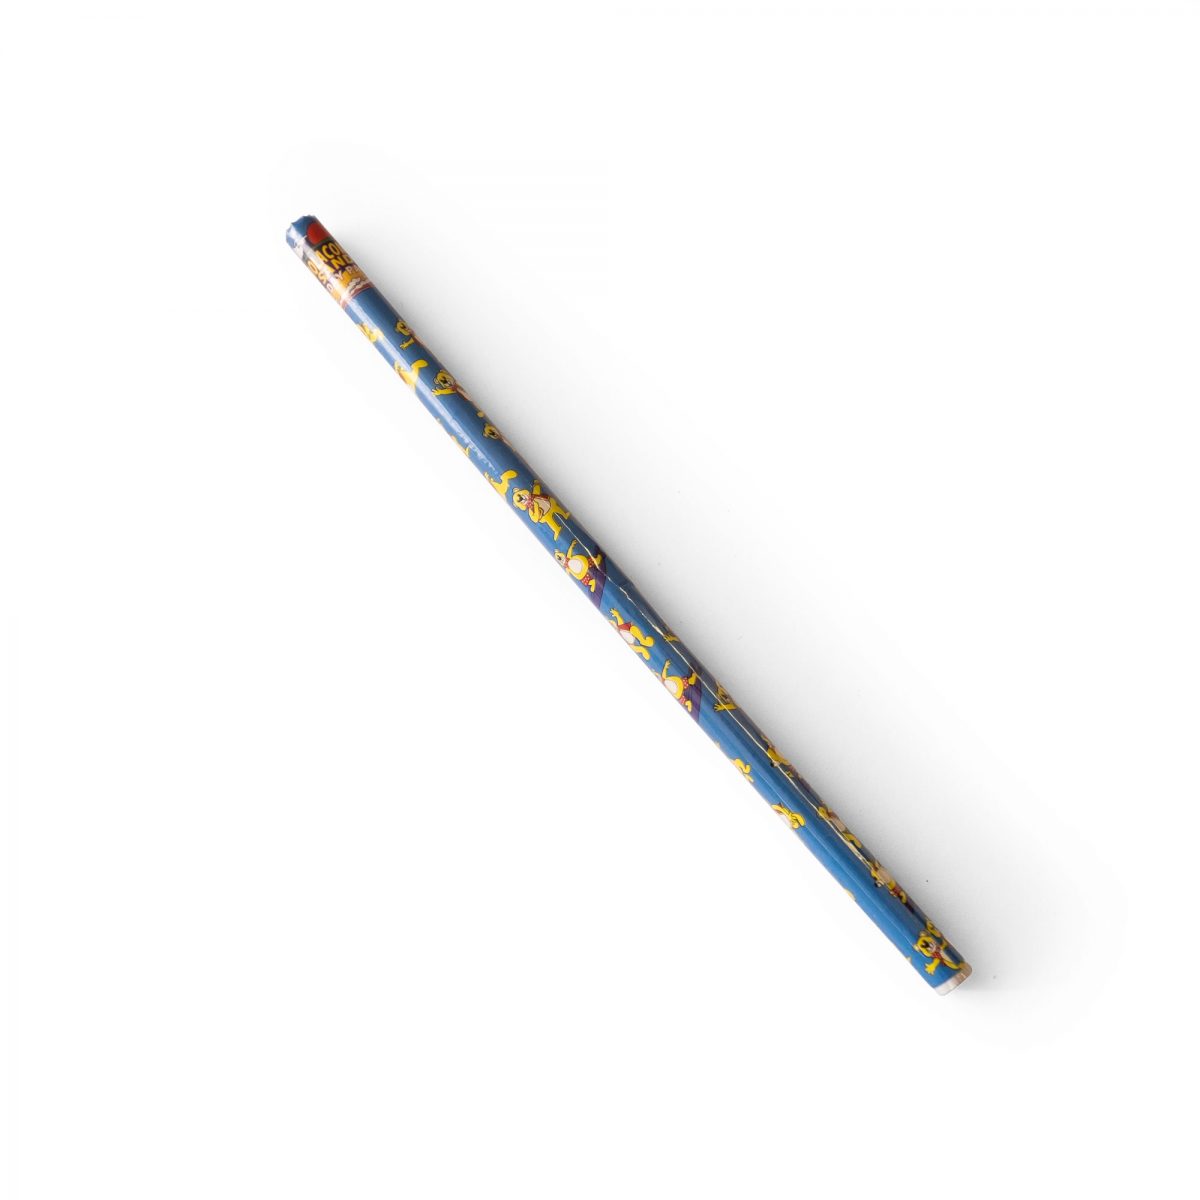 A Woolacombe Sands Holiday Park Pencil